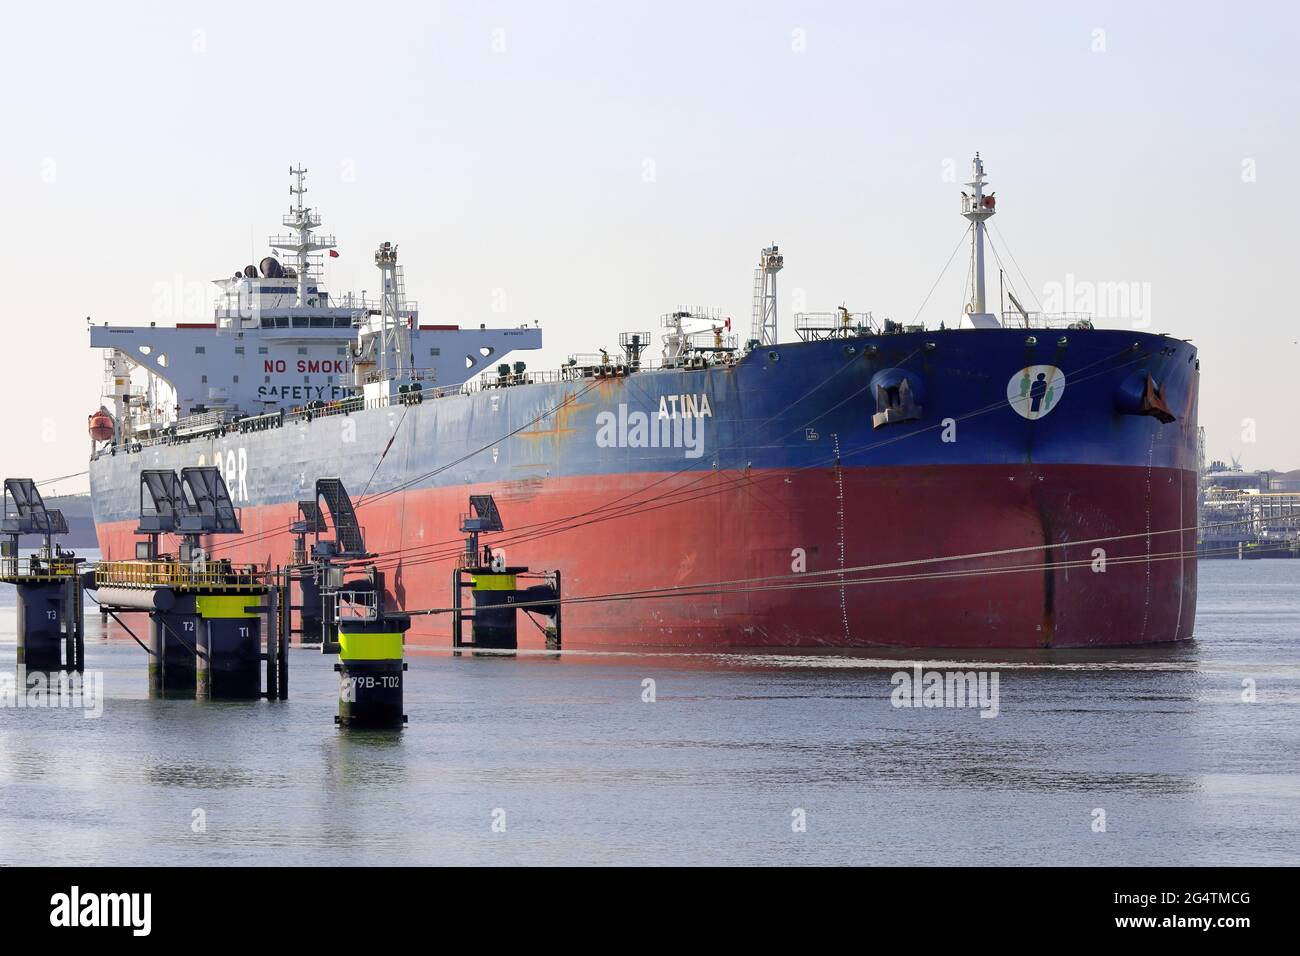 The crude oil tanker Atina will be in the port of Rotterdam on May 29, 2021. Stock Photo